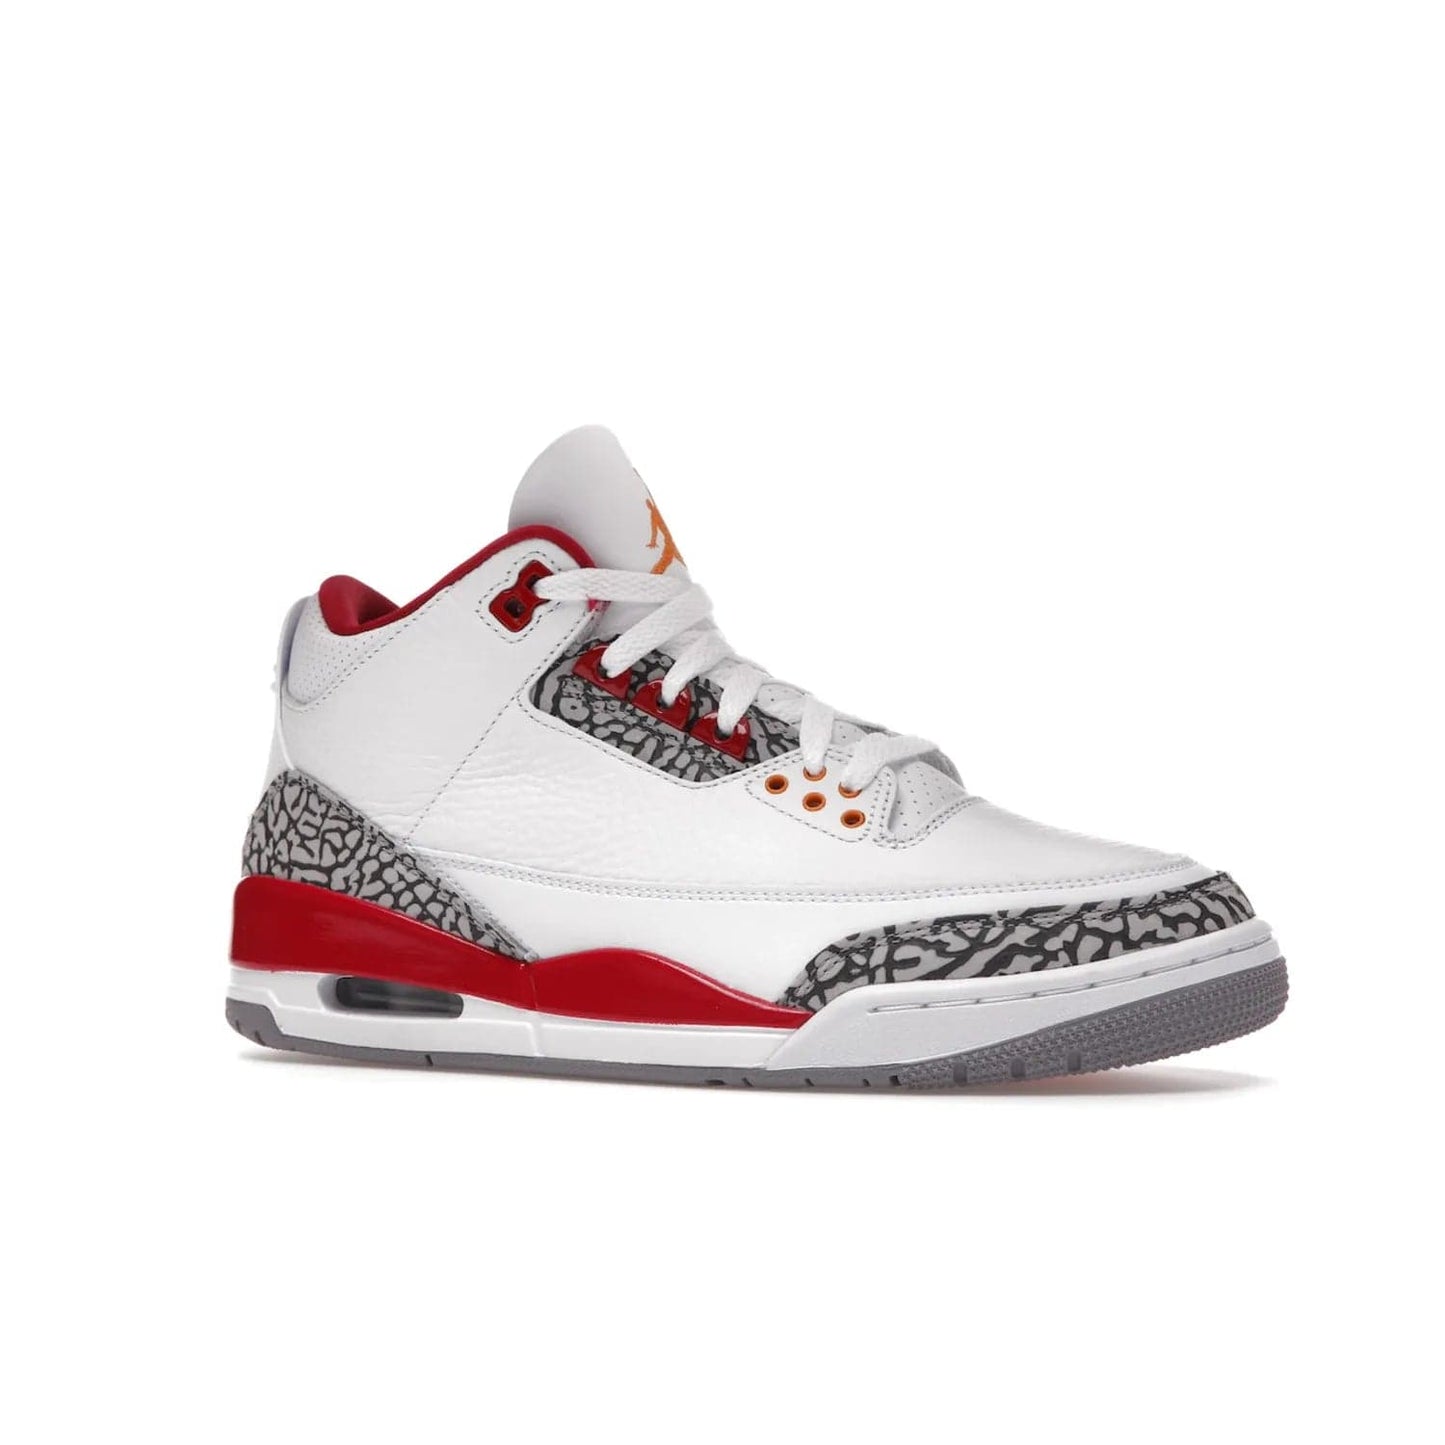 Jordan 3 Retro Cardinal Red - Image 4 - Only at www.BallersClubKickz.com - Air Jordan 3 Retro Cardinal Red combines classic style and modern appeal - white tumbled leather, signature Elephant Print overlays, cardinal red midsoles, Jumpman logo embroidery. Available Feb 2022.